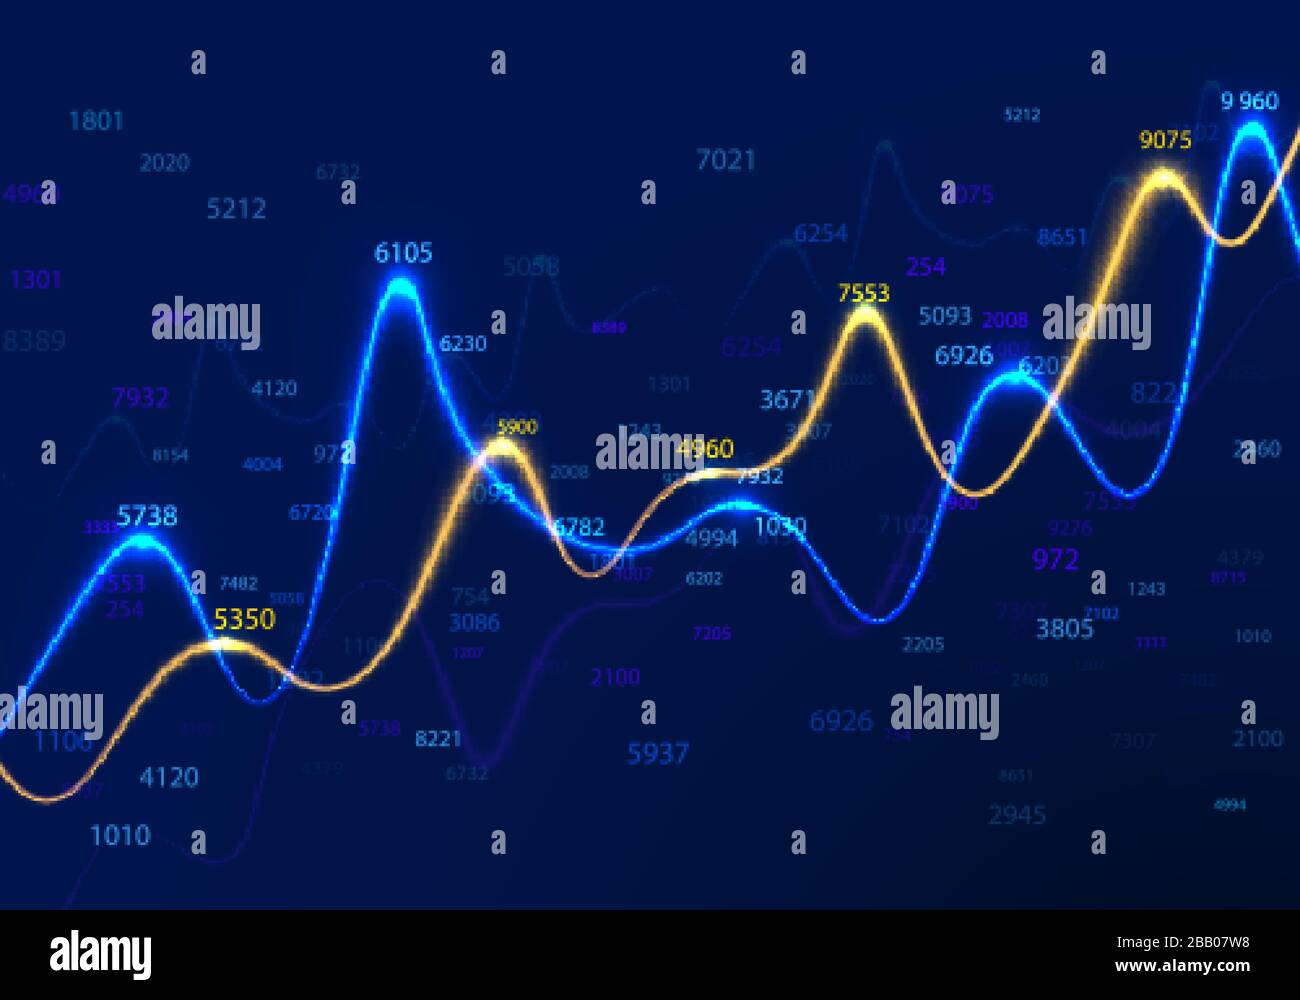 Business diagrams and charts on blue background with random numbers. Data statistic and commerce research. Financial report and economic diagrams. Inf Stock Vector